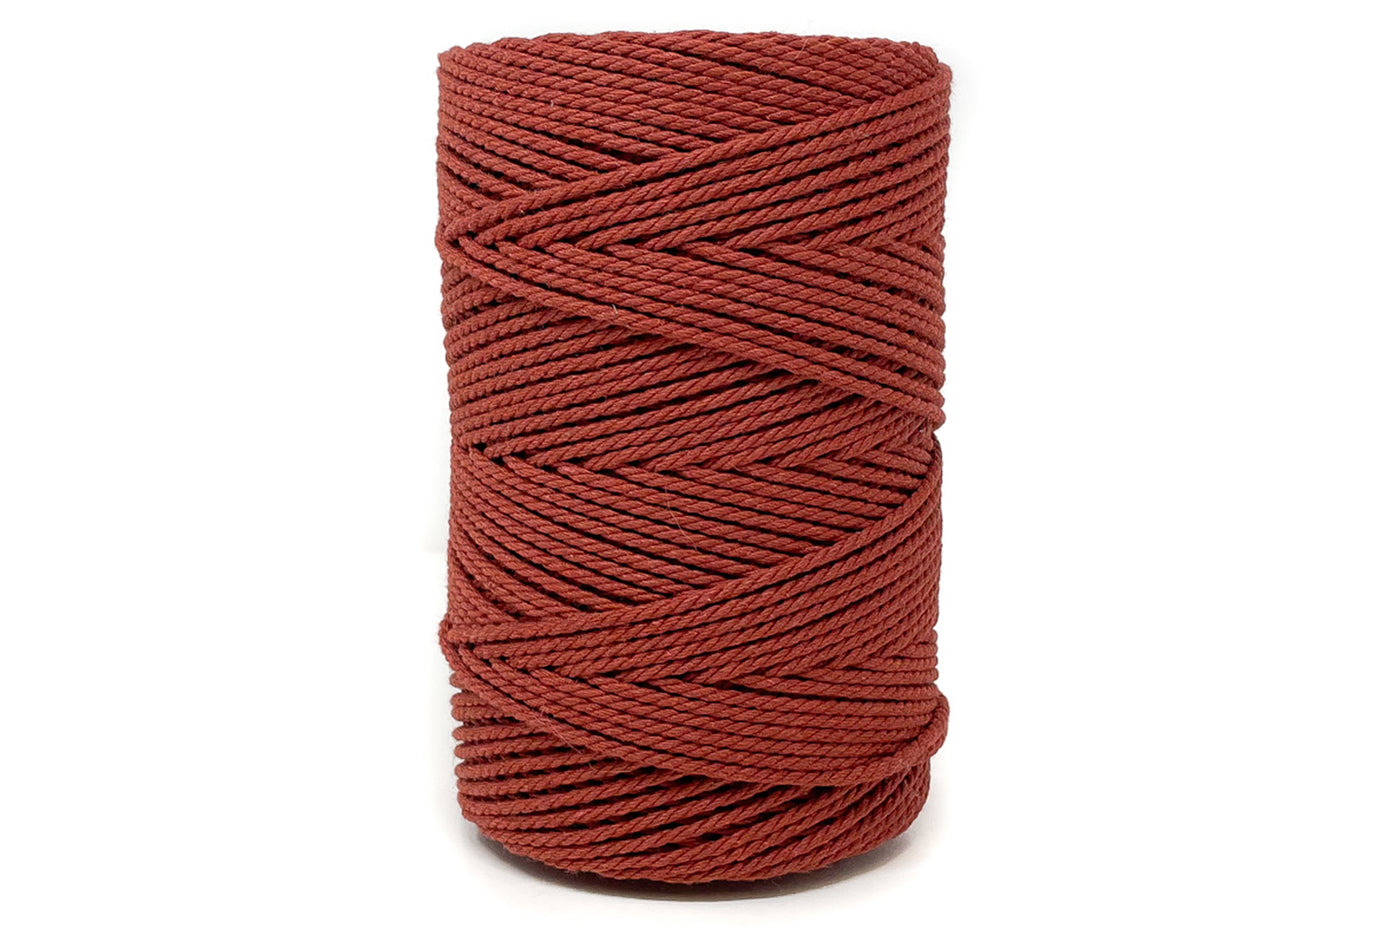 COTTON ROPE ZERO WASTE 2 MM - 3 PLY  - RED AMBER COLOR